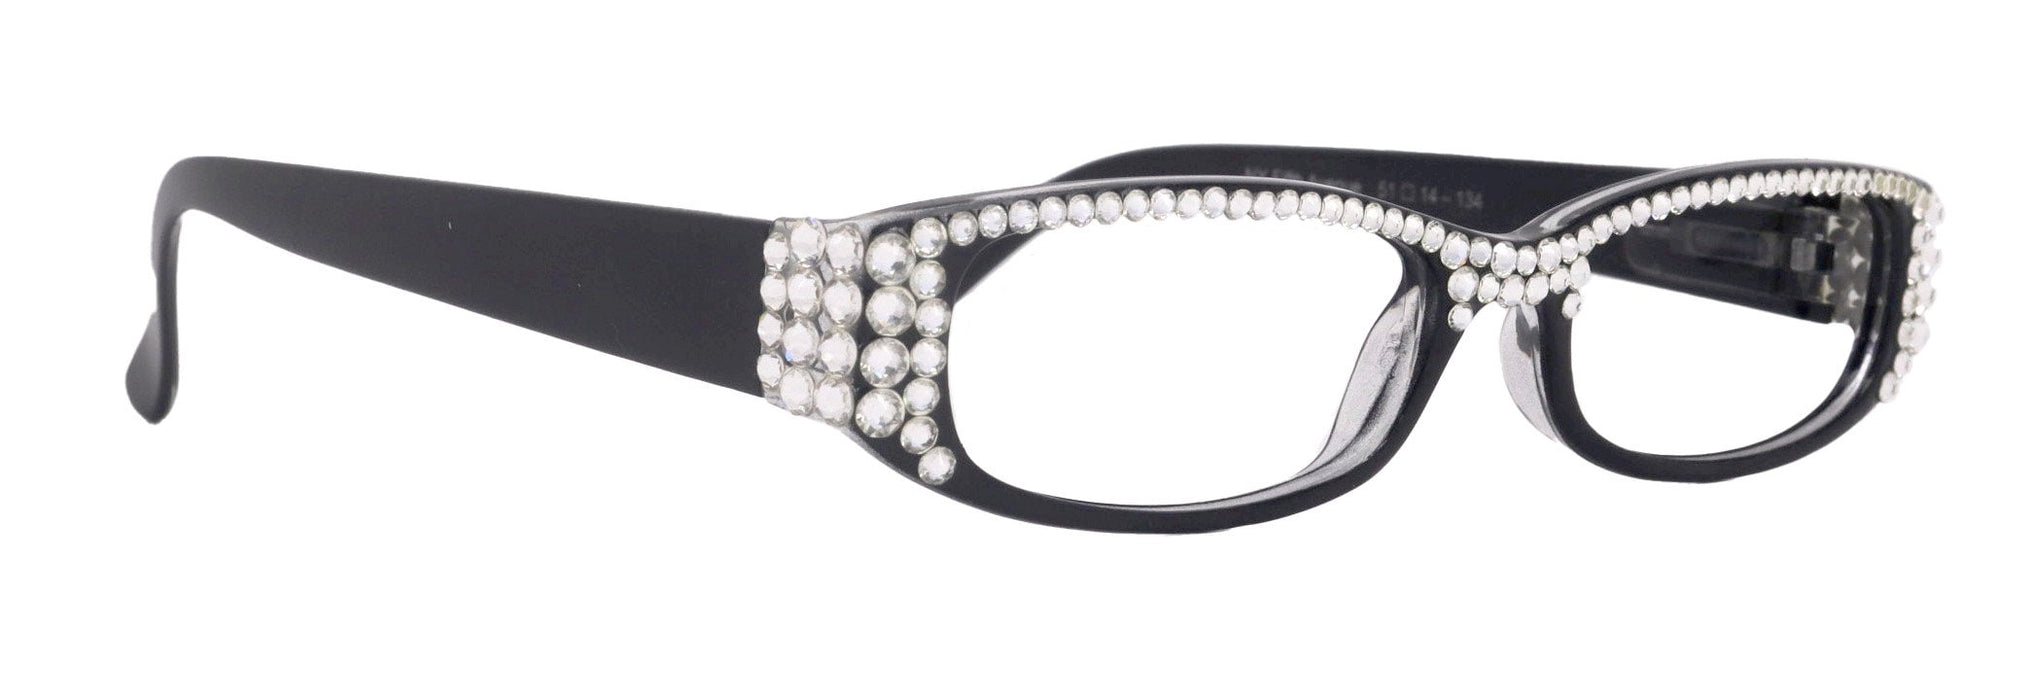 Elise, Bling Reading Glasses For Women W Full Top (Clear)Genuine European Crystals rectangular (Black) +1.25 ..+3, NY Fifth Avenue.